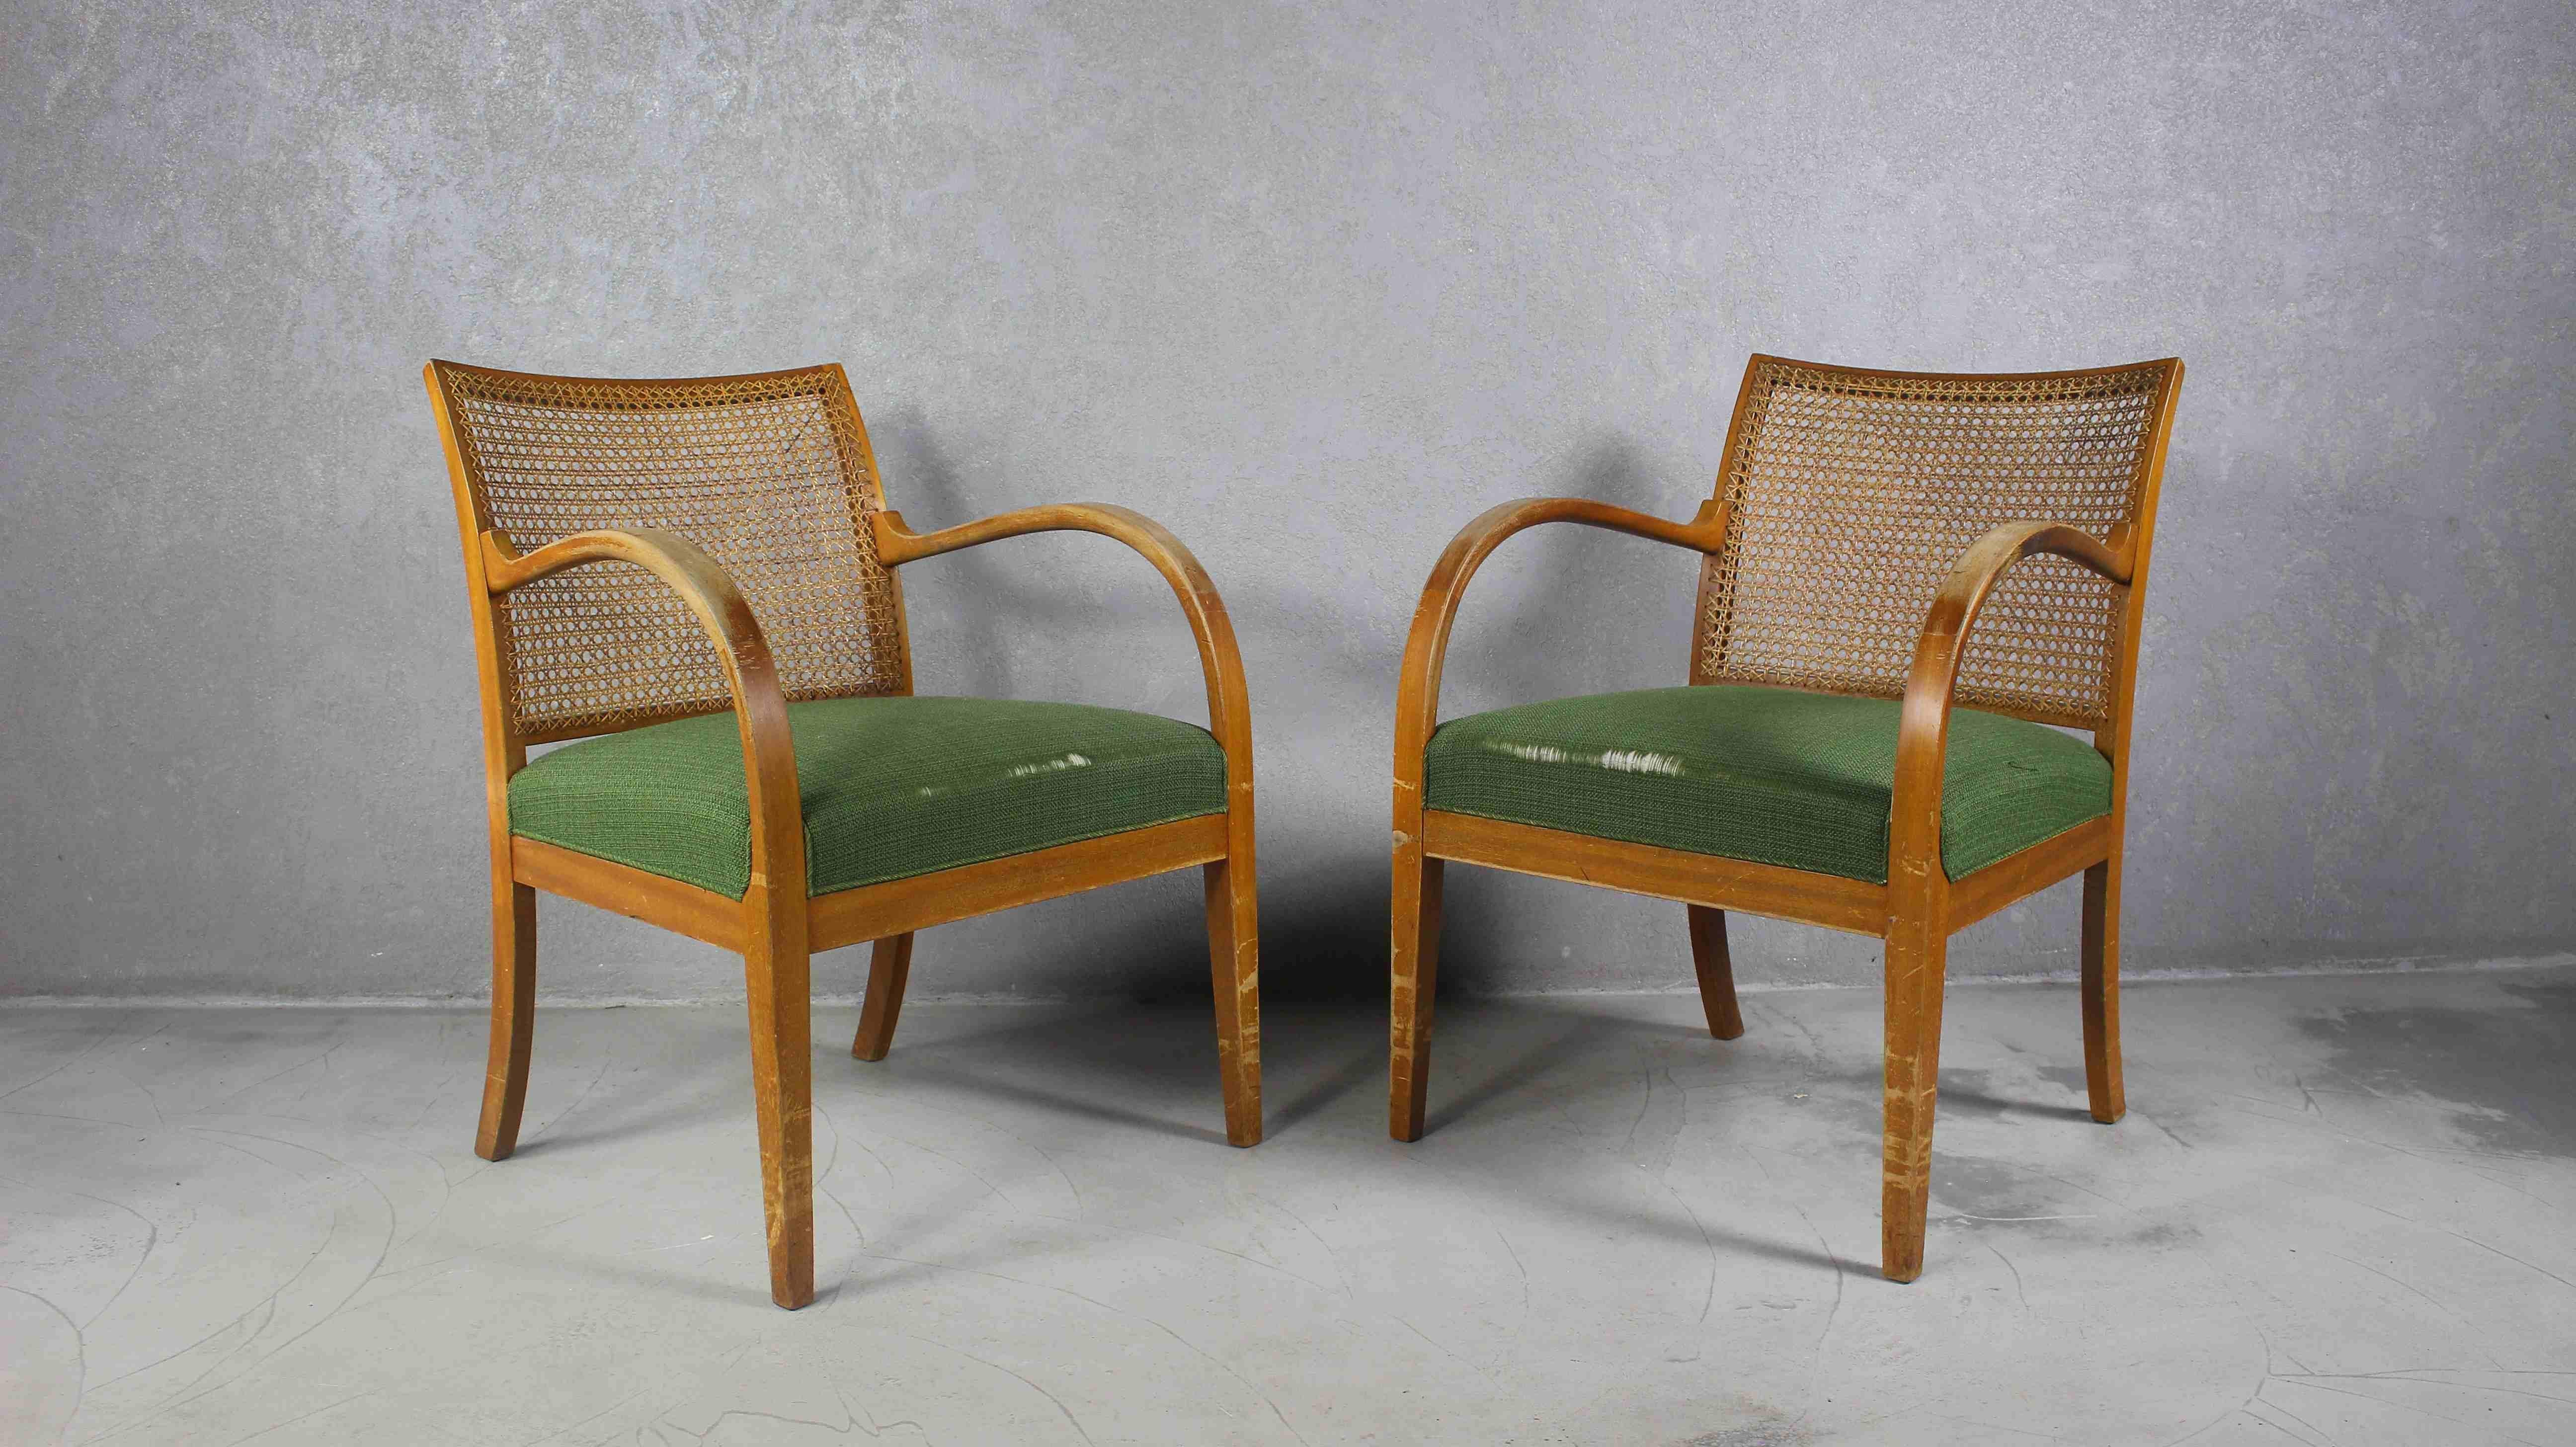 A beautiful pair of Art Deco armchairs, designed in the colonial style.
The seats with springs, backrests are upholstered in rattan.